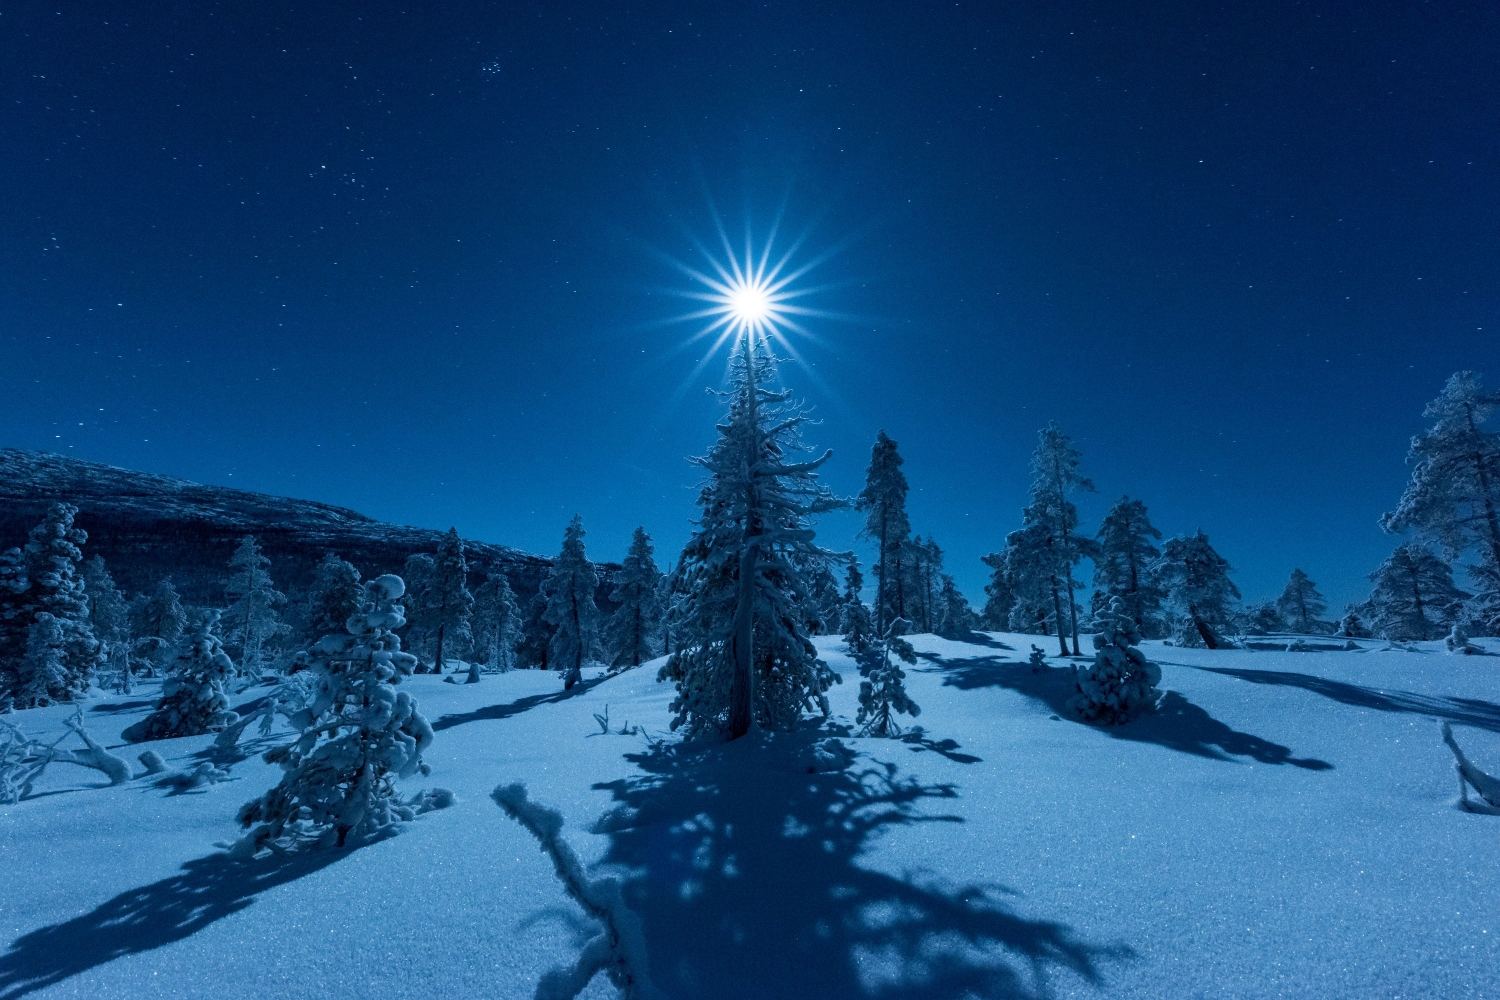 Moonlight above a Christmas tree